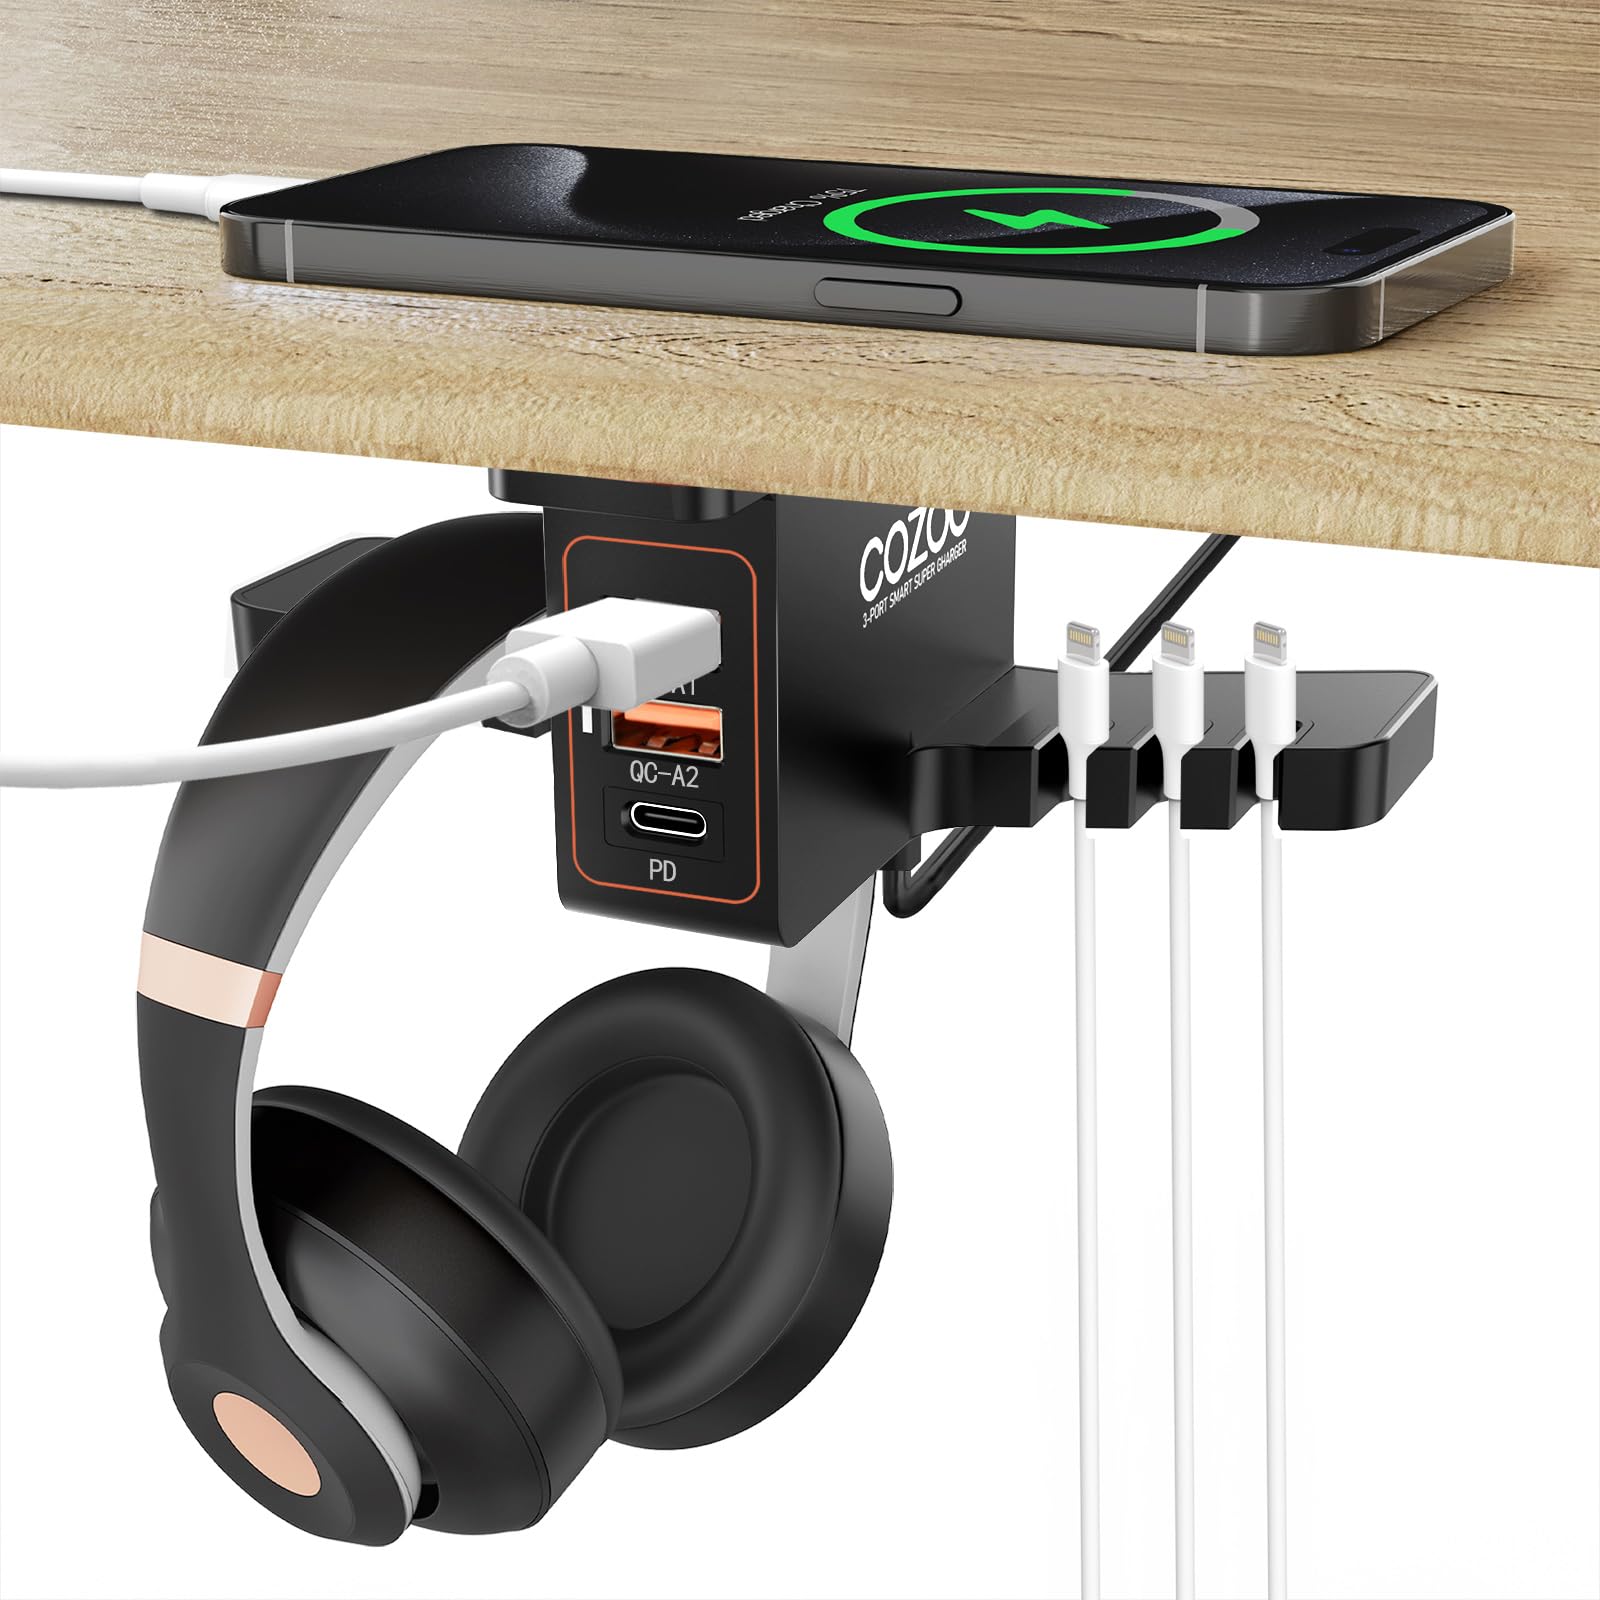 Headphones connected to a laptop or computer with a charging cable.